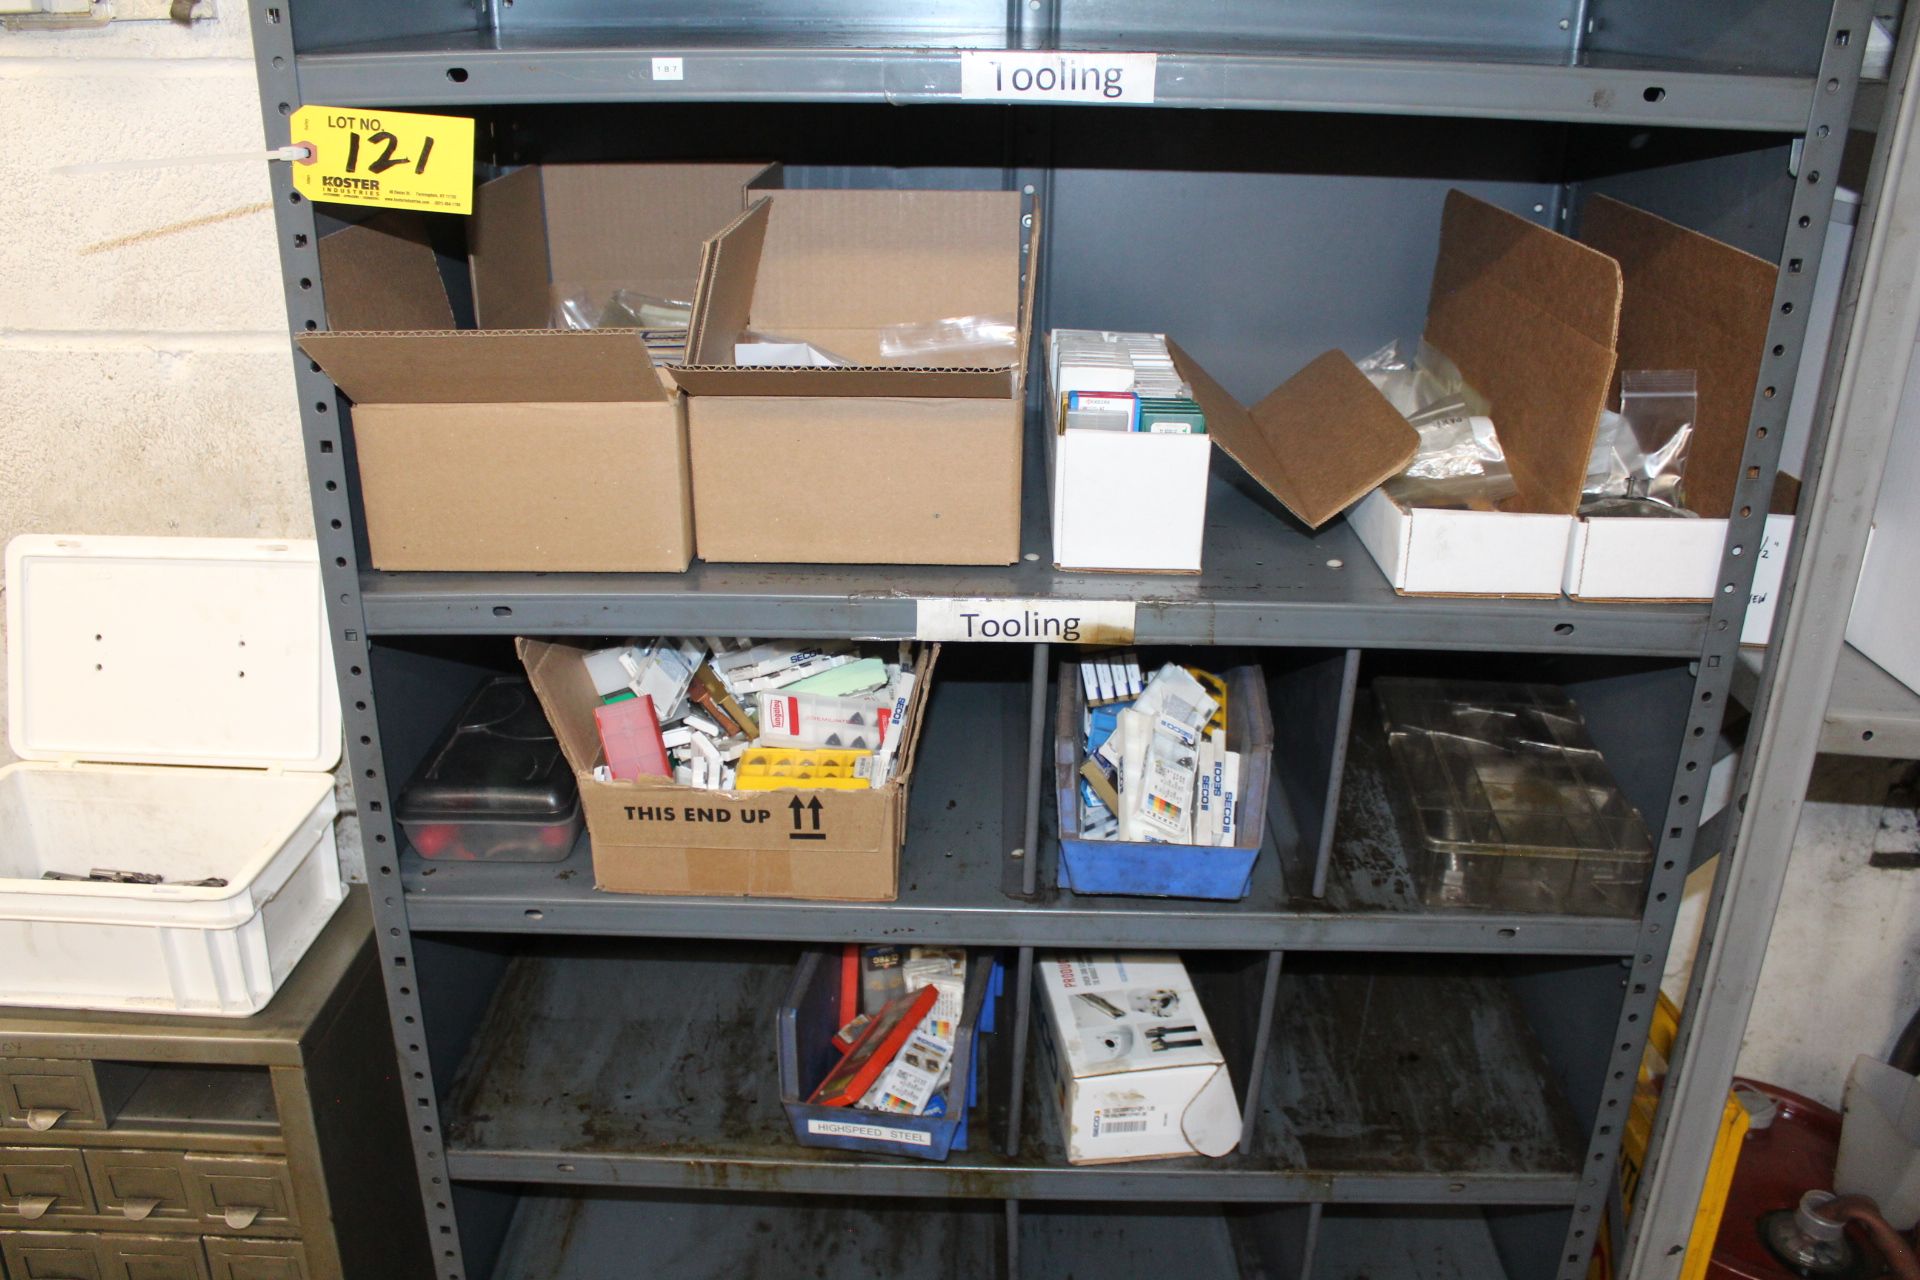 LOT OF (4) SHELVING UNITS W/ CARBIDE & HIGH SPEED CUTTERS, INSERTS, HOLDERS, ETC. - Image 4 of 6